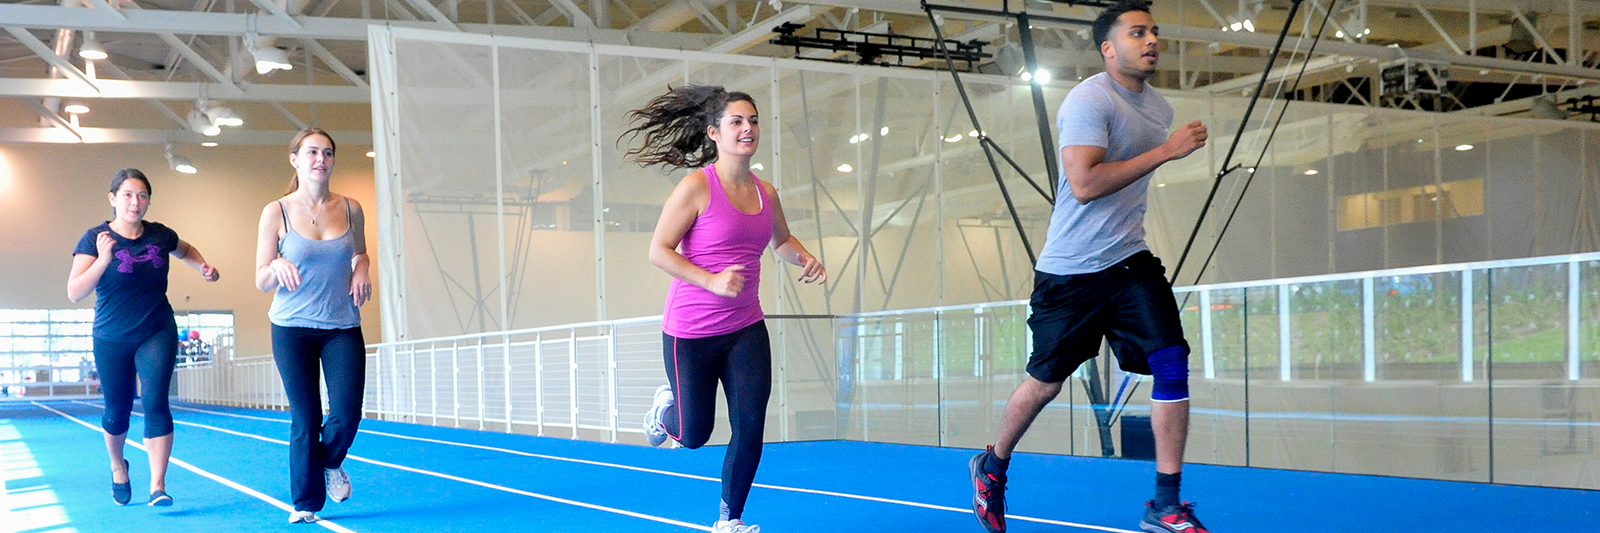 UTSC students running on a track